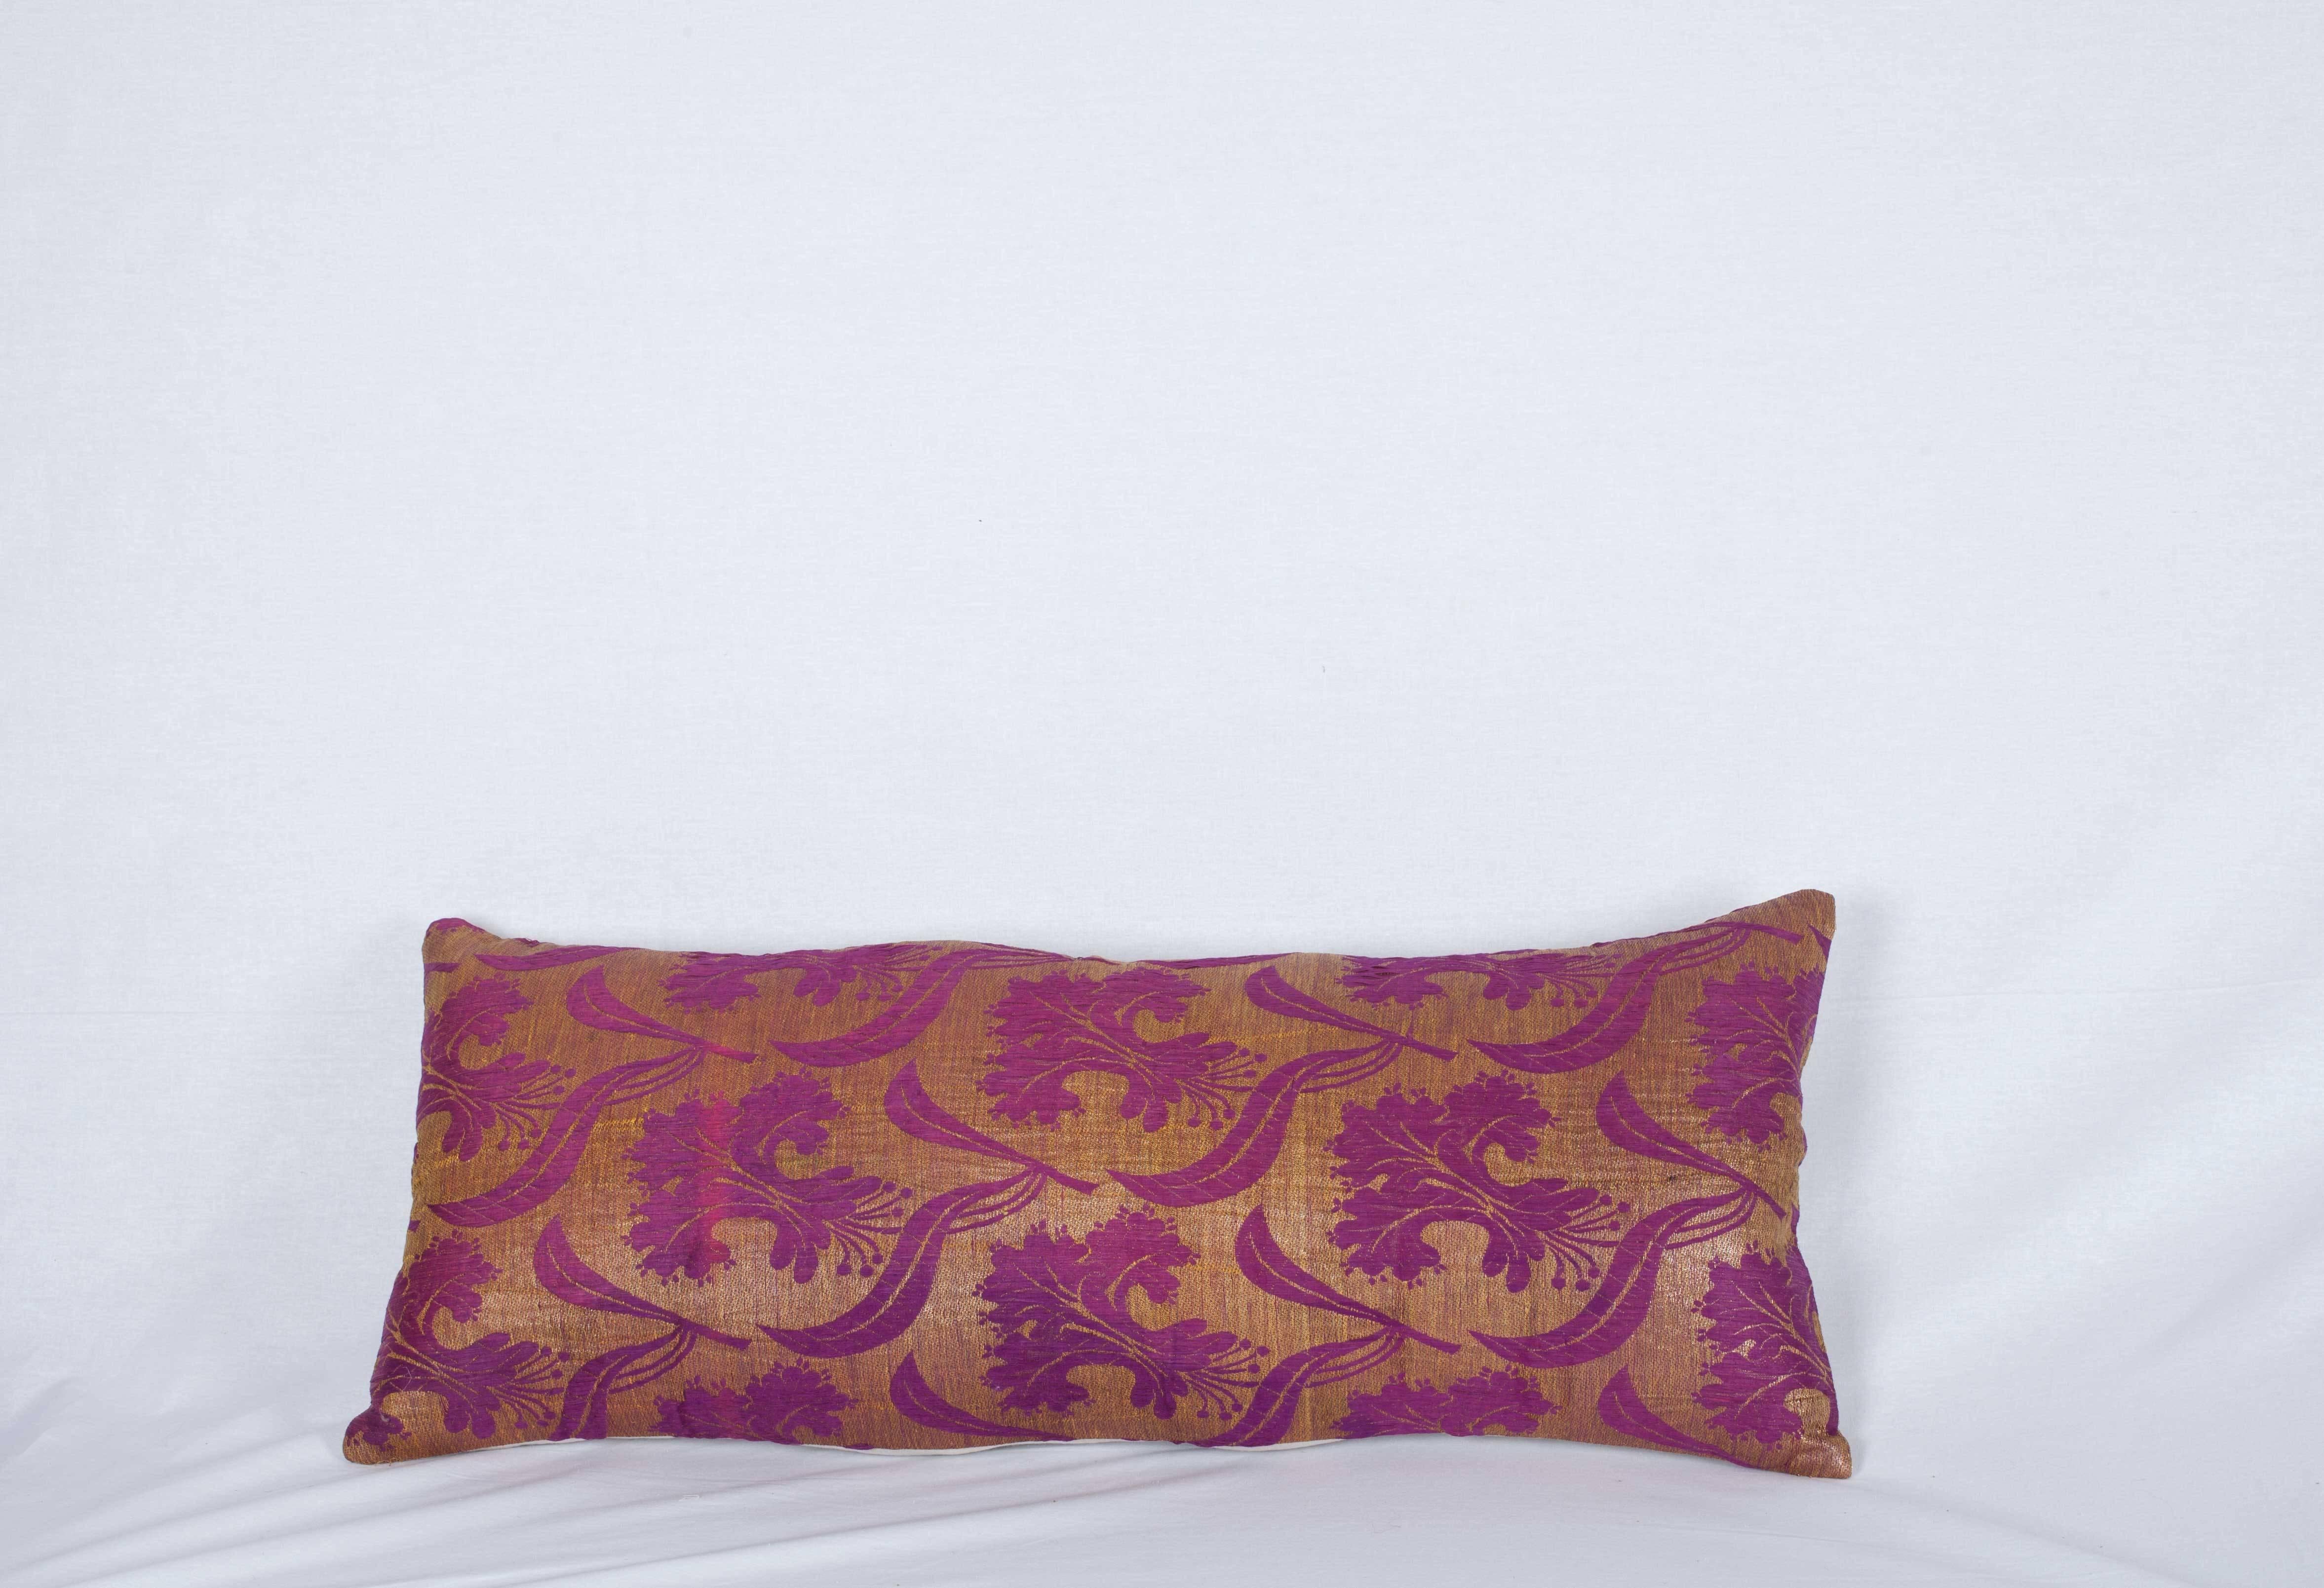 The pillow is made out of a late 19th ottoman Turkish silk brocade.
 It does not come with an insert but it comes with a bag made to the size and out of cotton to accommodate the filling.
 The backing is made of linen.
 
 Please note filling is